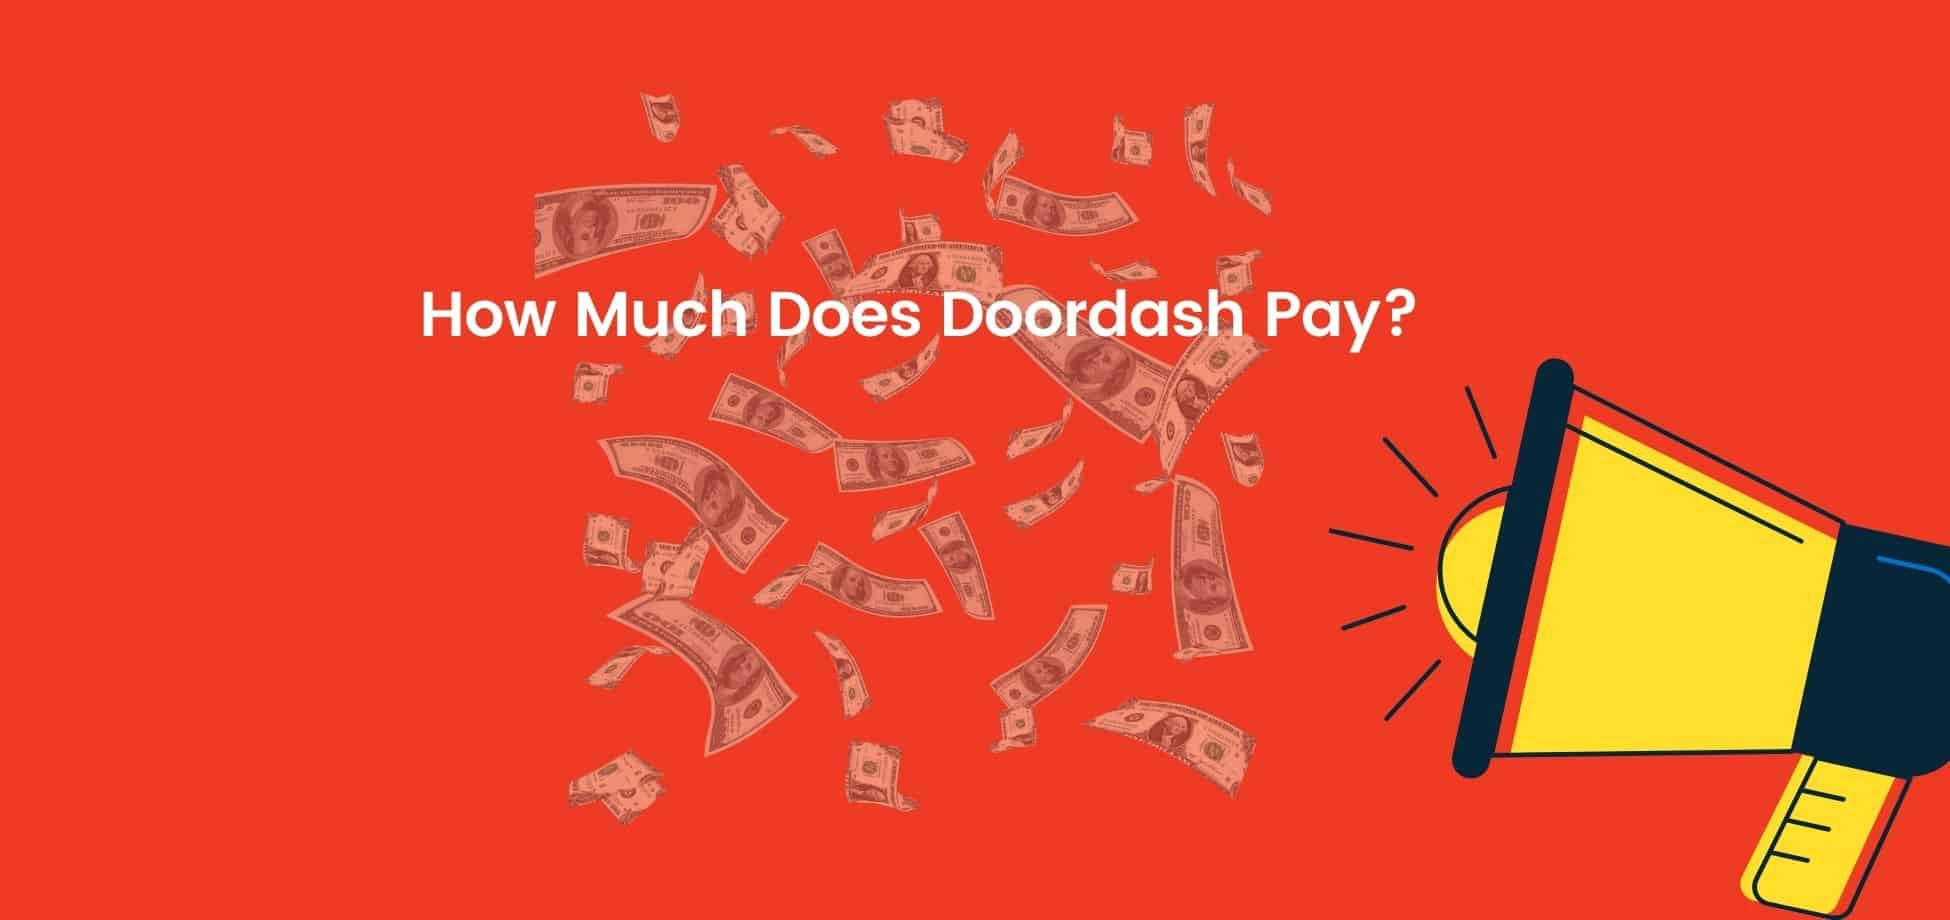 Doordash salaries for dashers can go as high as up to $45,000 a year, with a lot of work in busy areas.